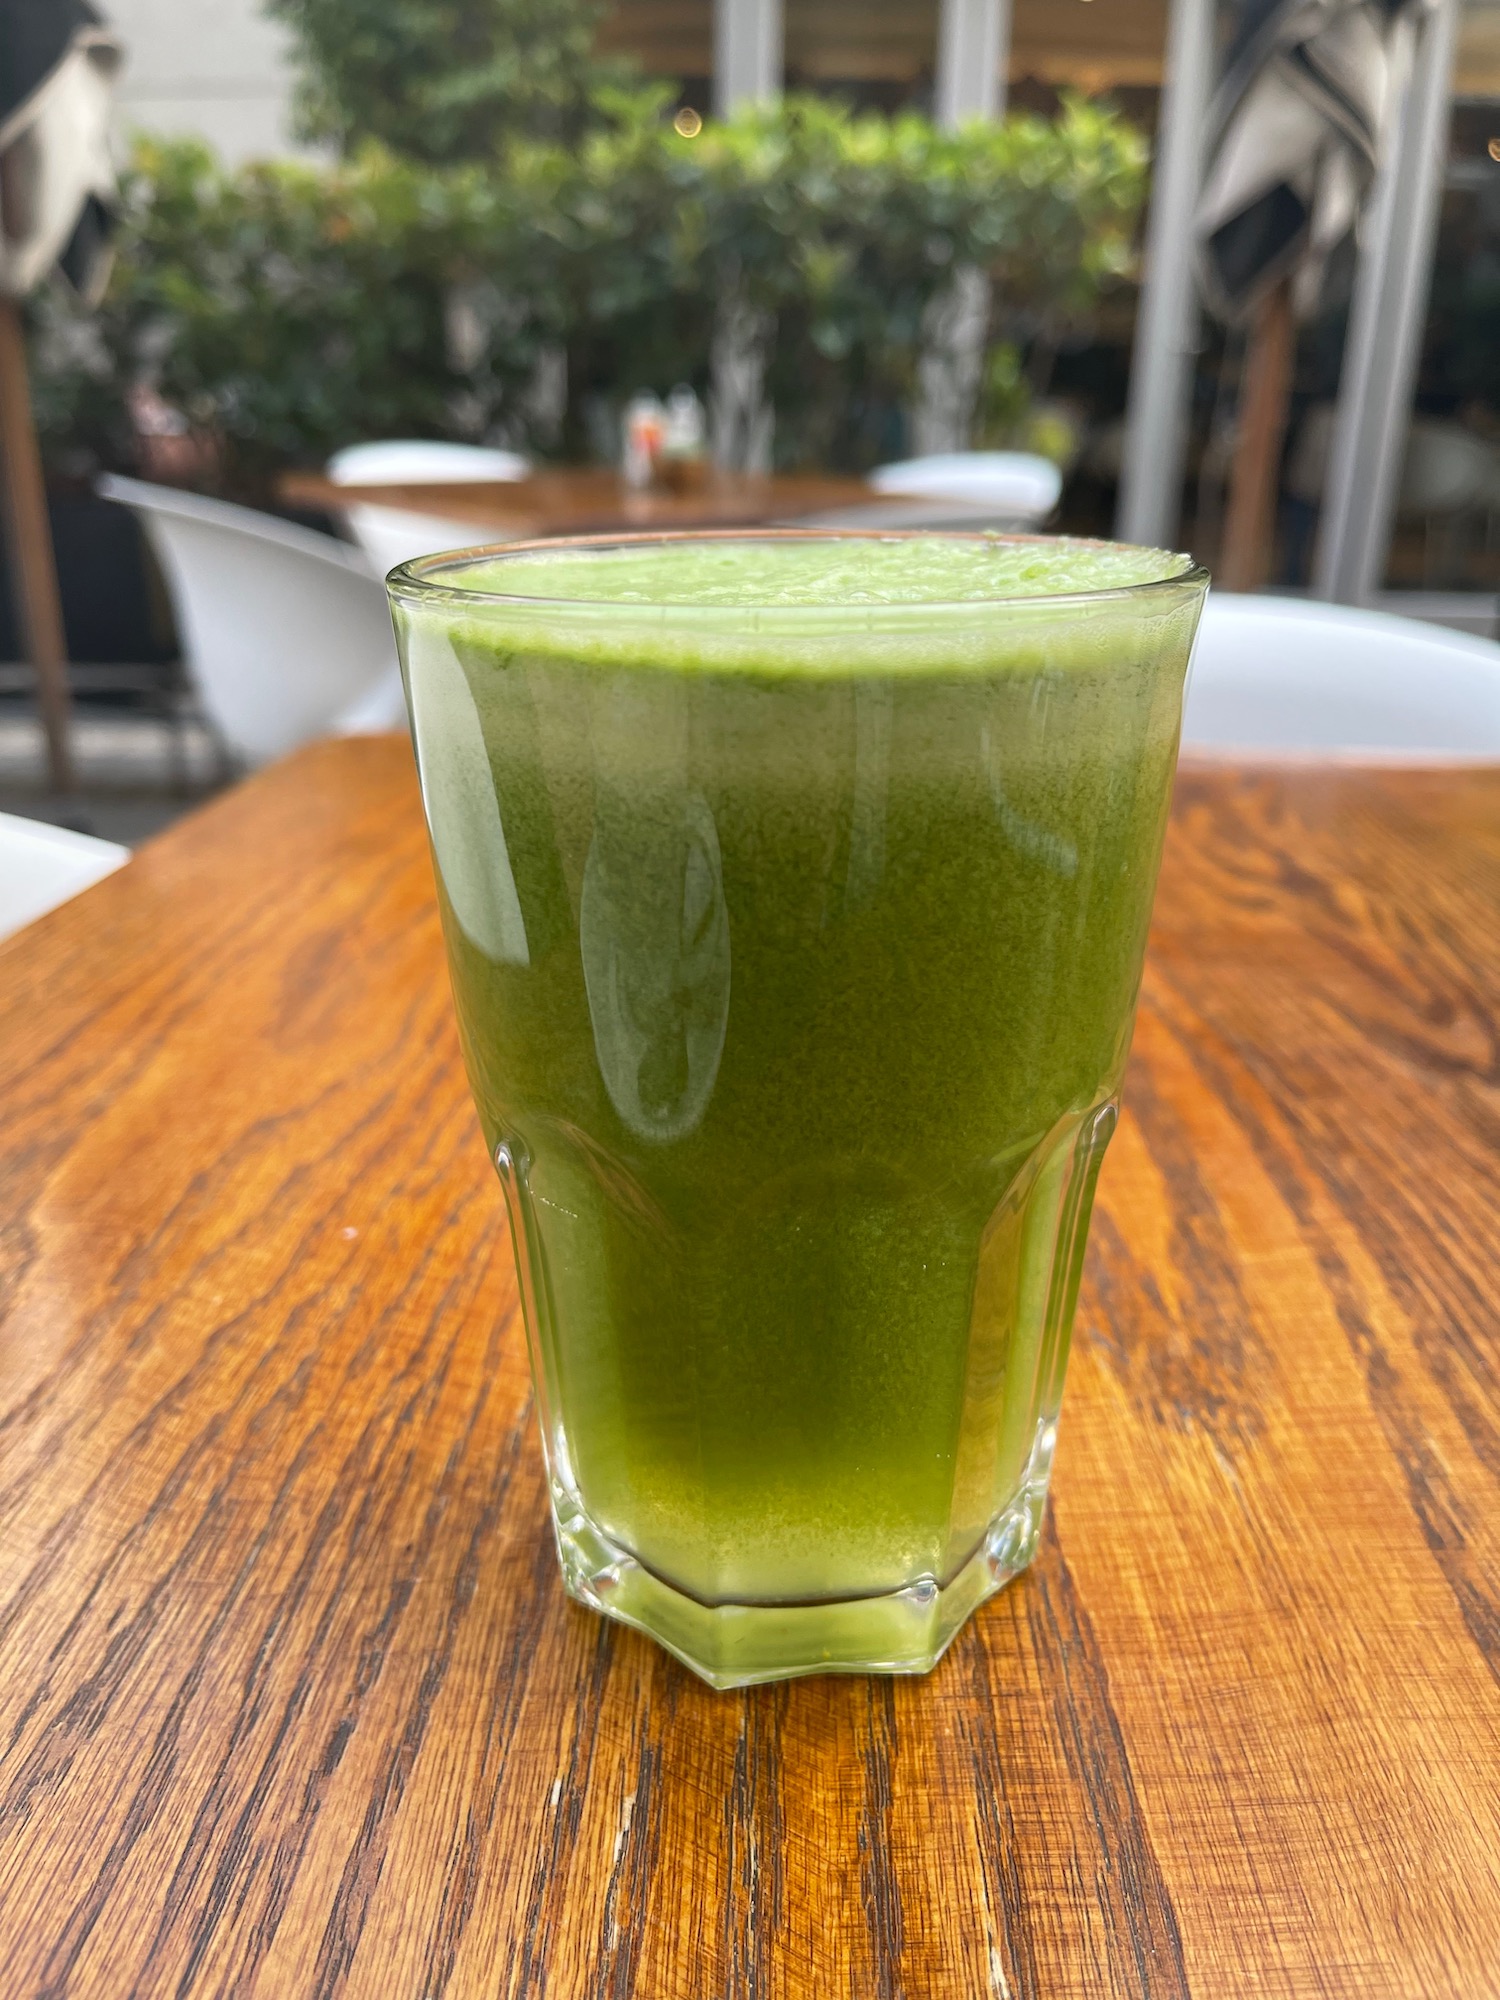 a glass of green liquid on a table